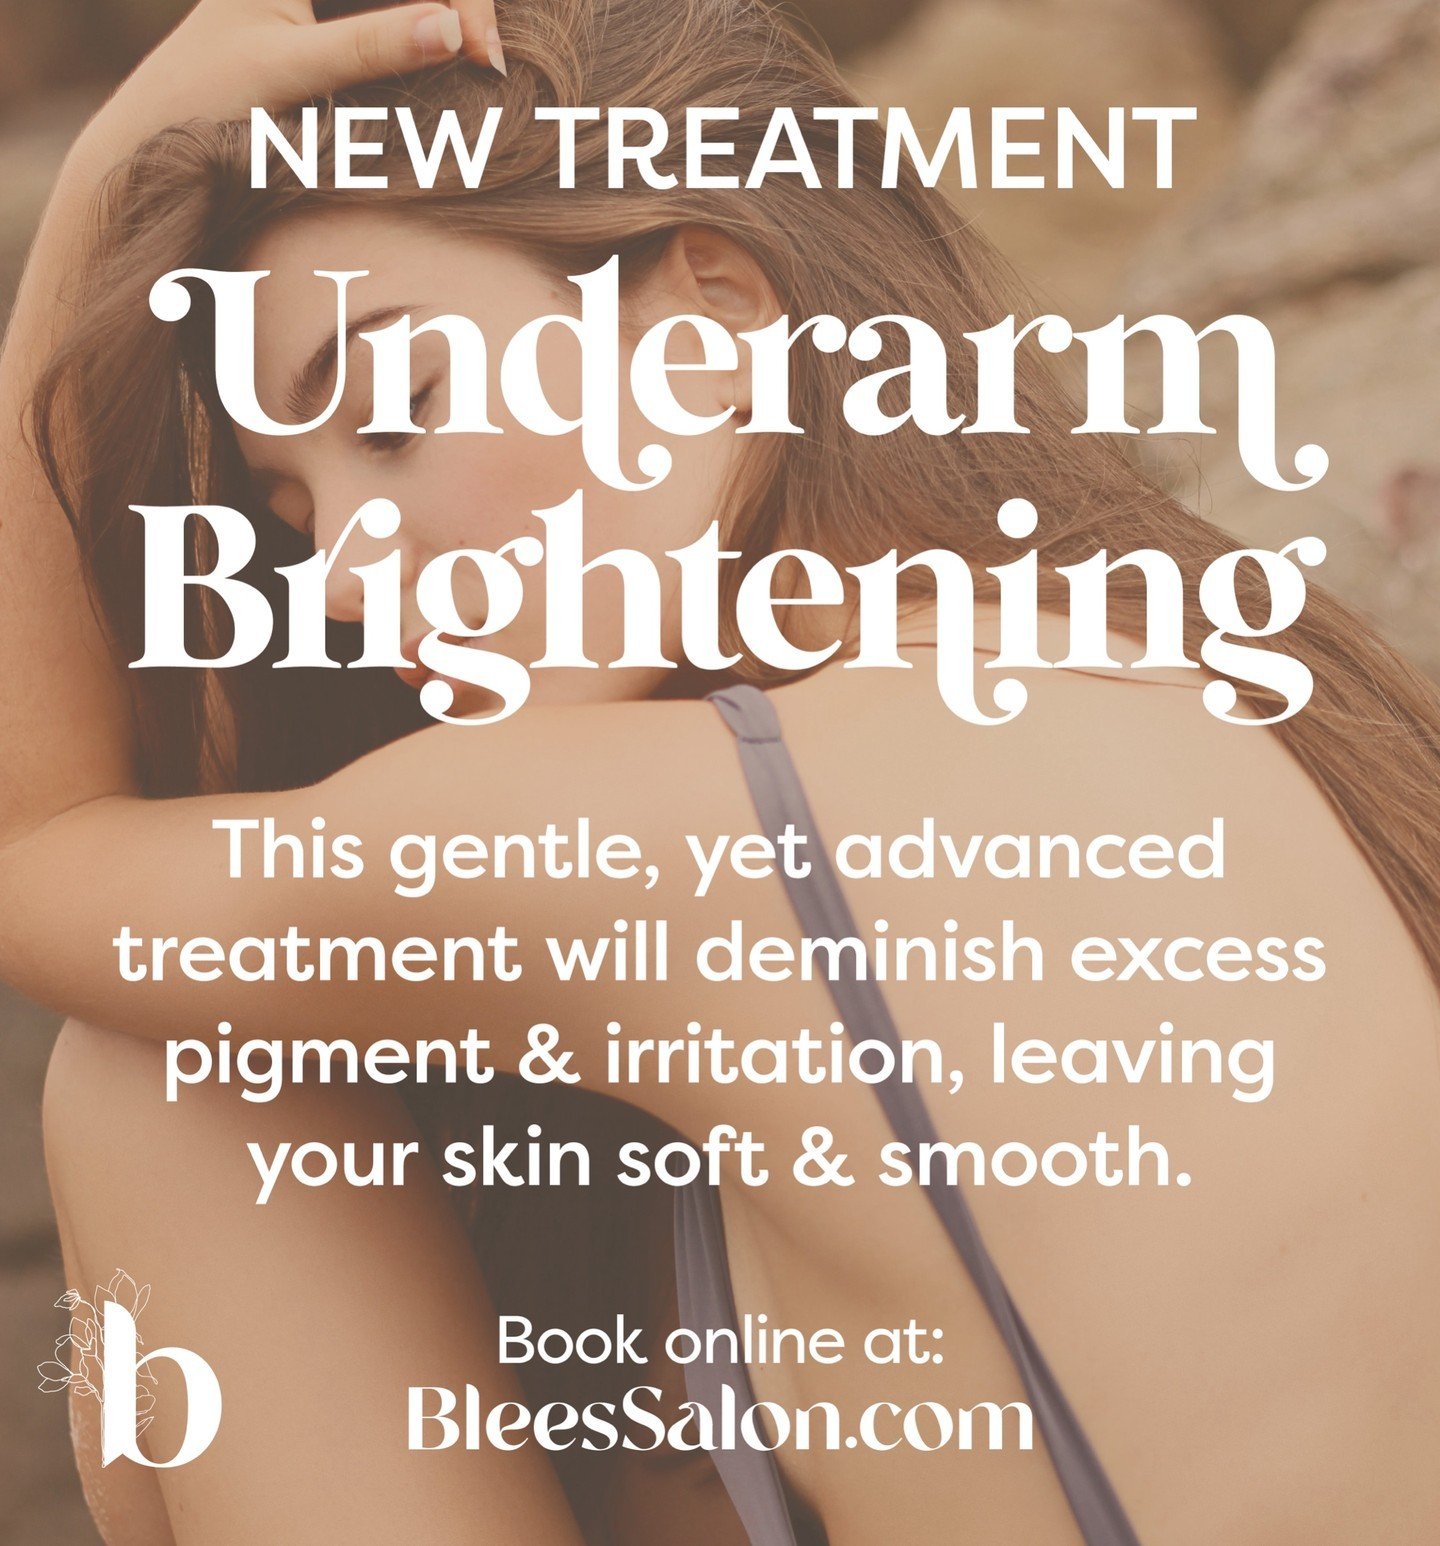 New Treatment: Underarm Brightening 🌟
And just in time for Summer! 
This underarm treatment will treat pigment and irritation leaving your pits smooth and tank top ready 😎

 #estheticians #licensedesthetician #skincareprofessional #skincarespeciali